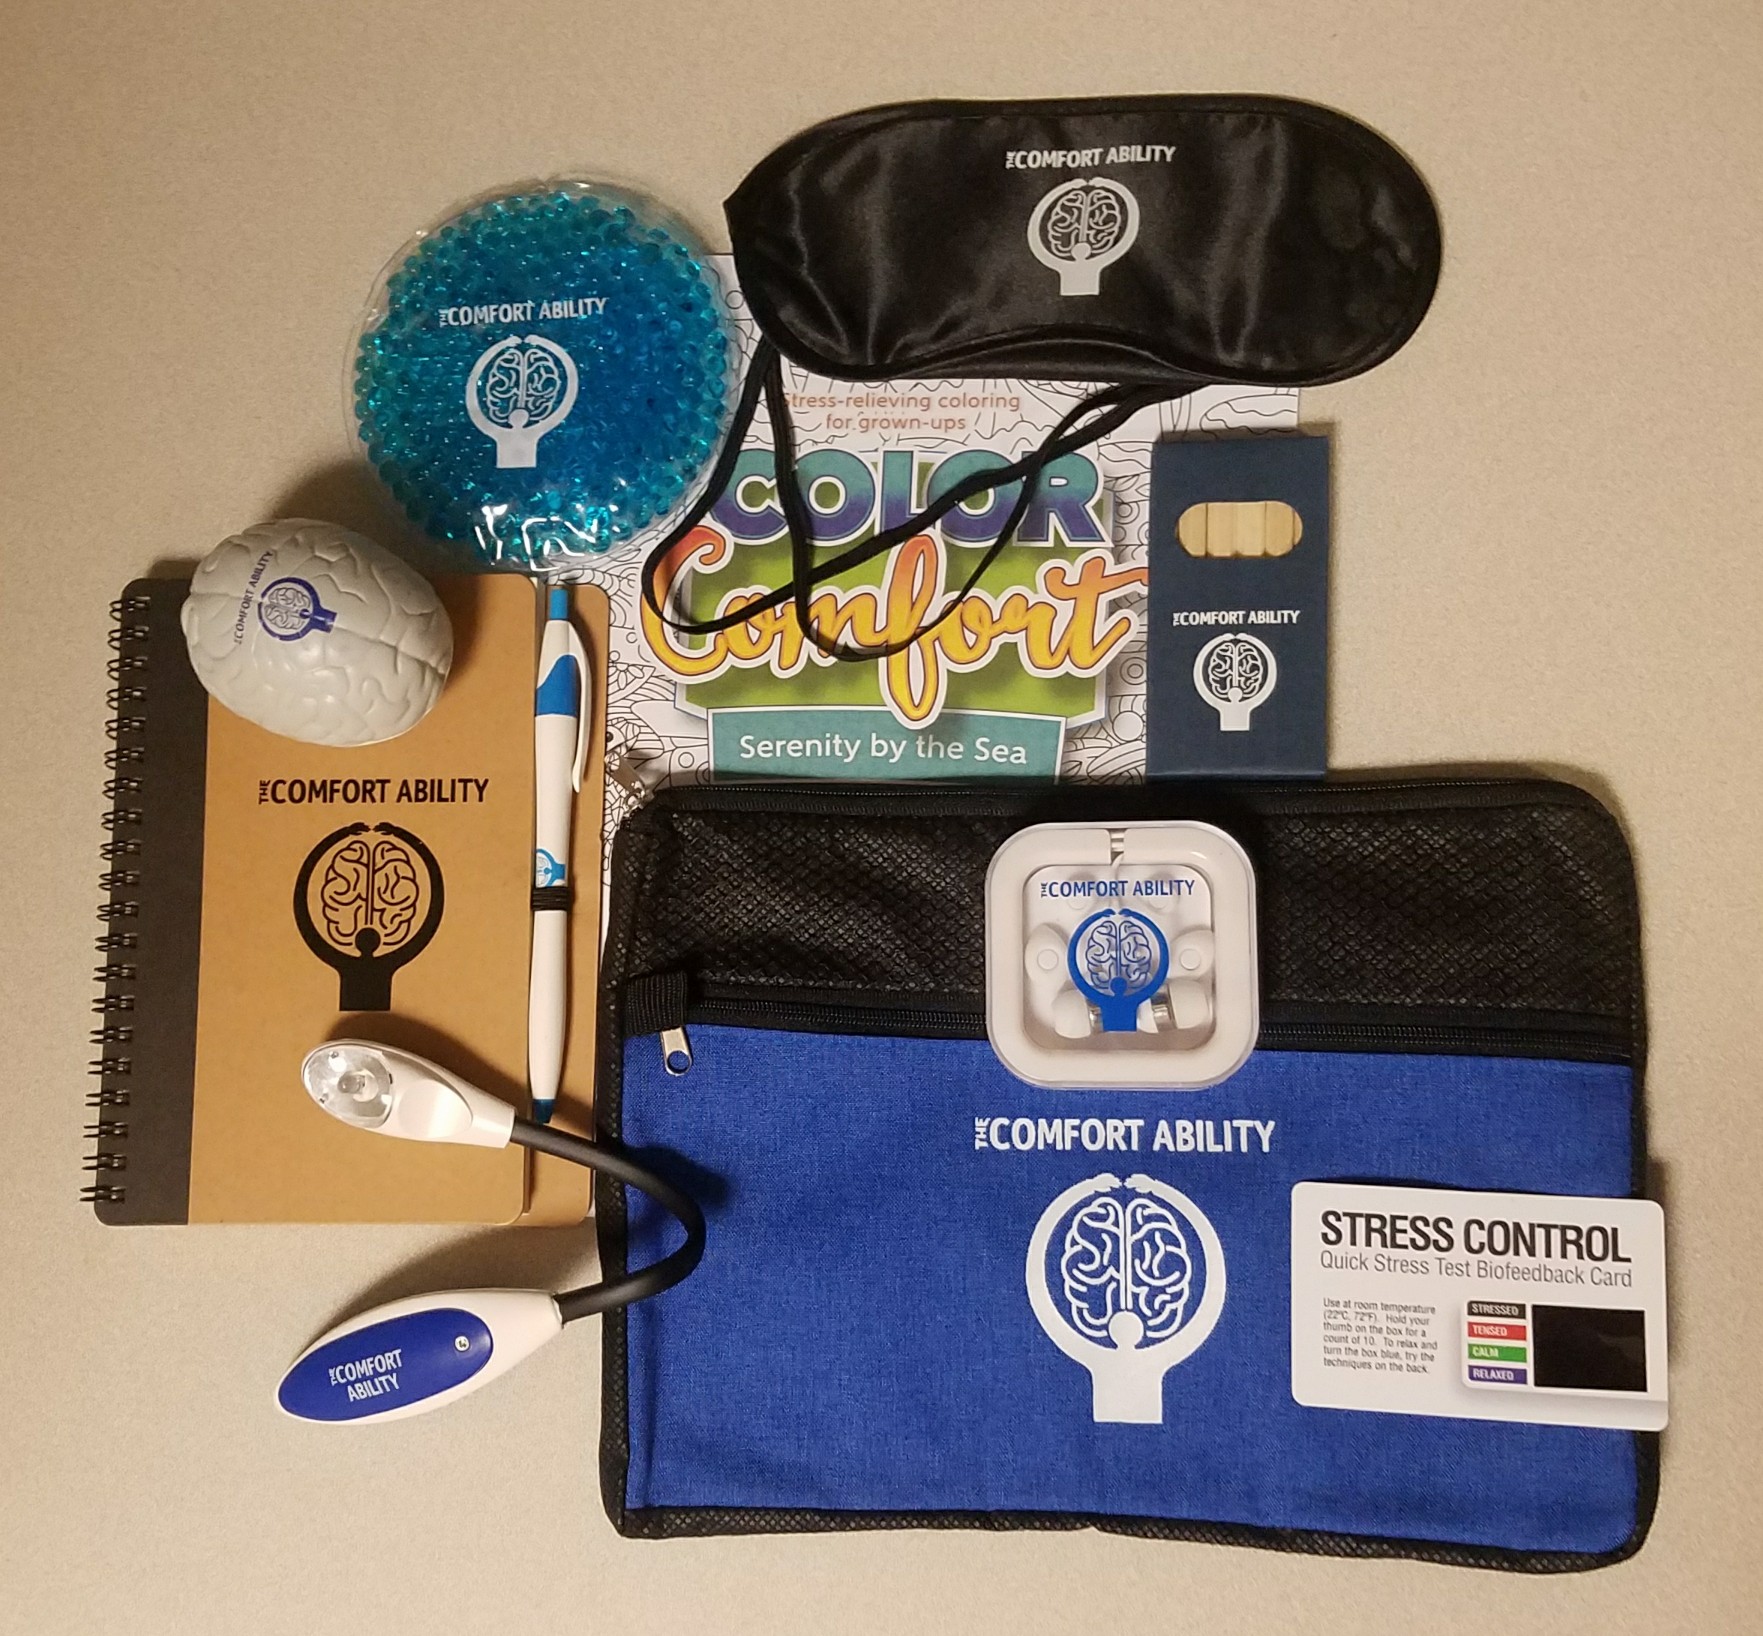 An image of items that make up the Comfort Ability's Comfort Kit